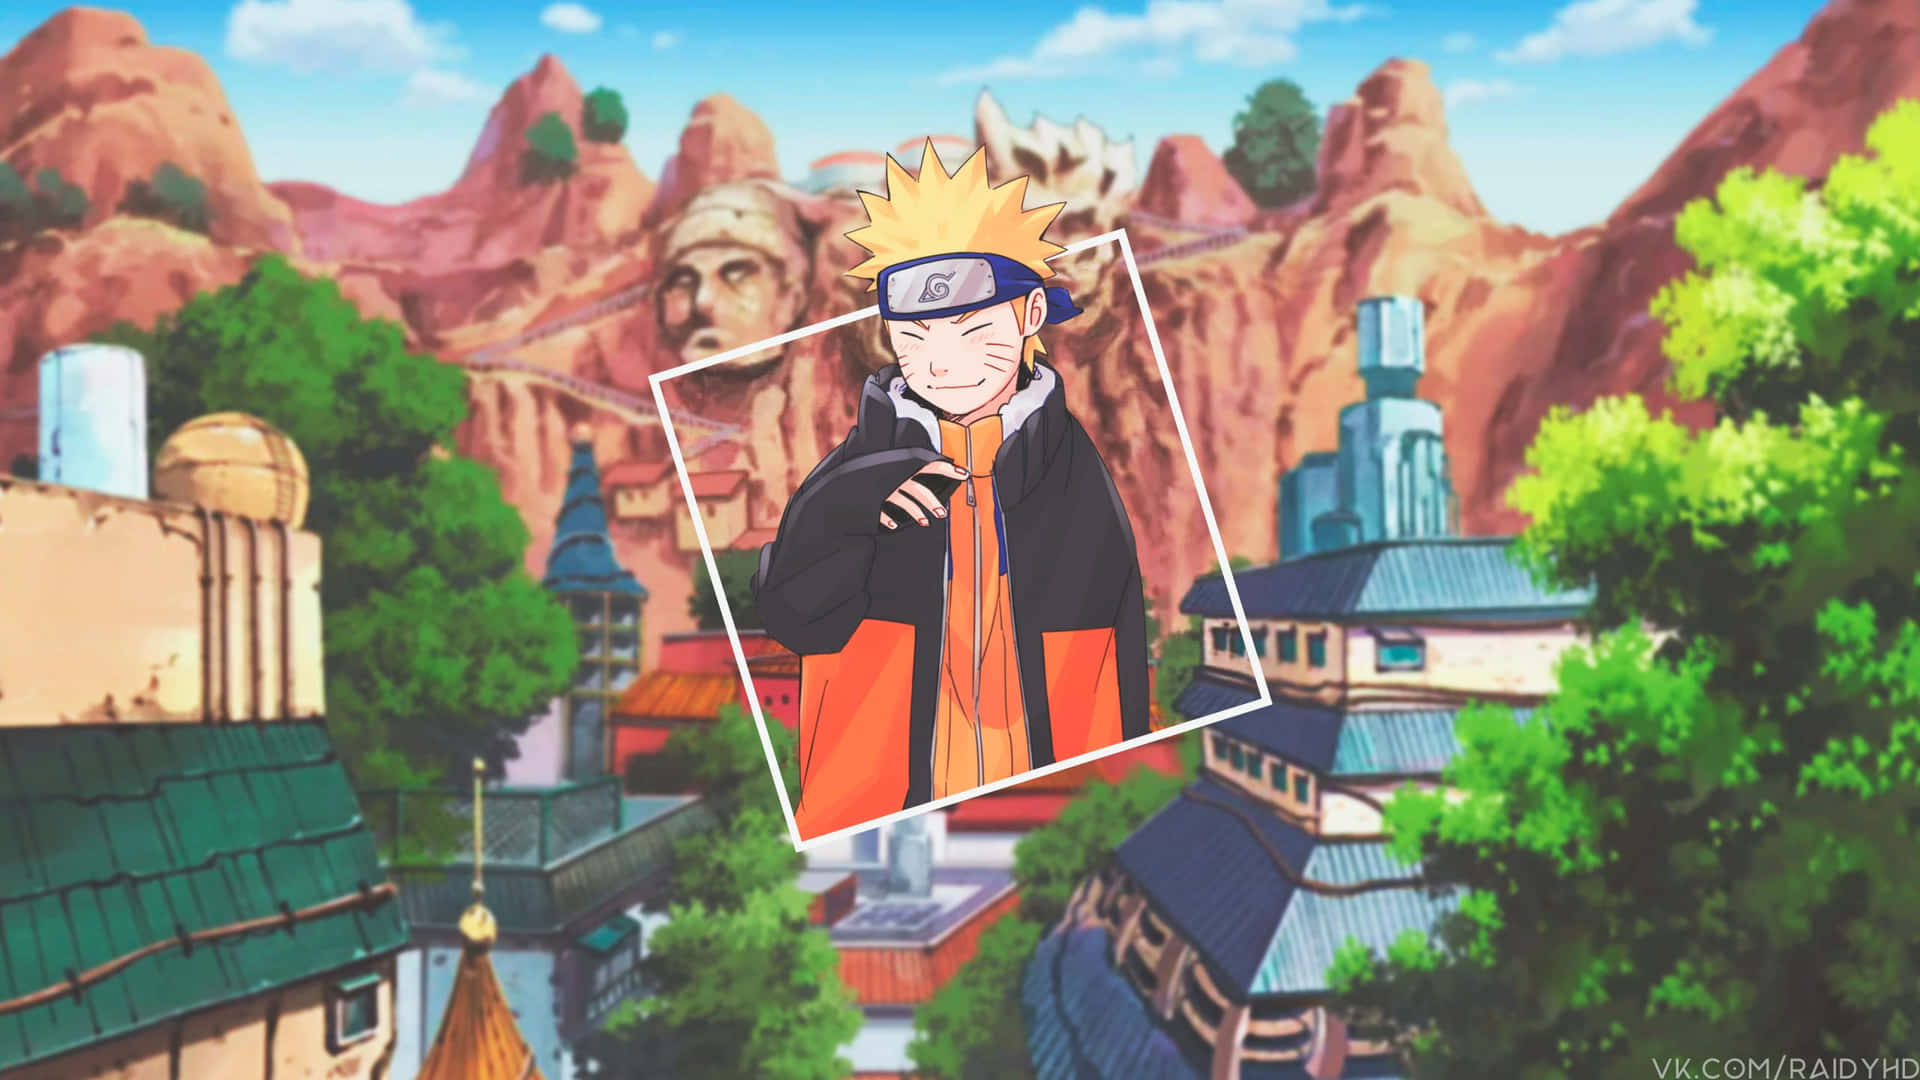 Take in the beauty of the Naruto Scenery Wallpaper